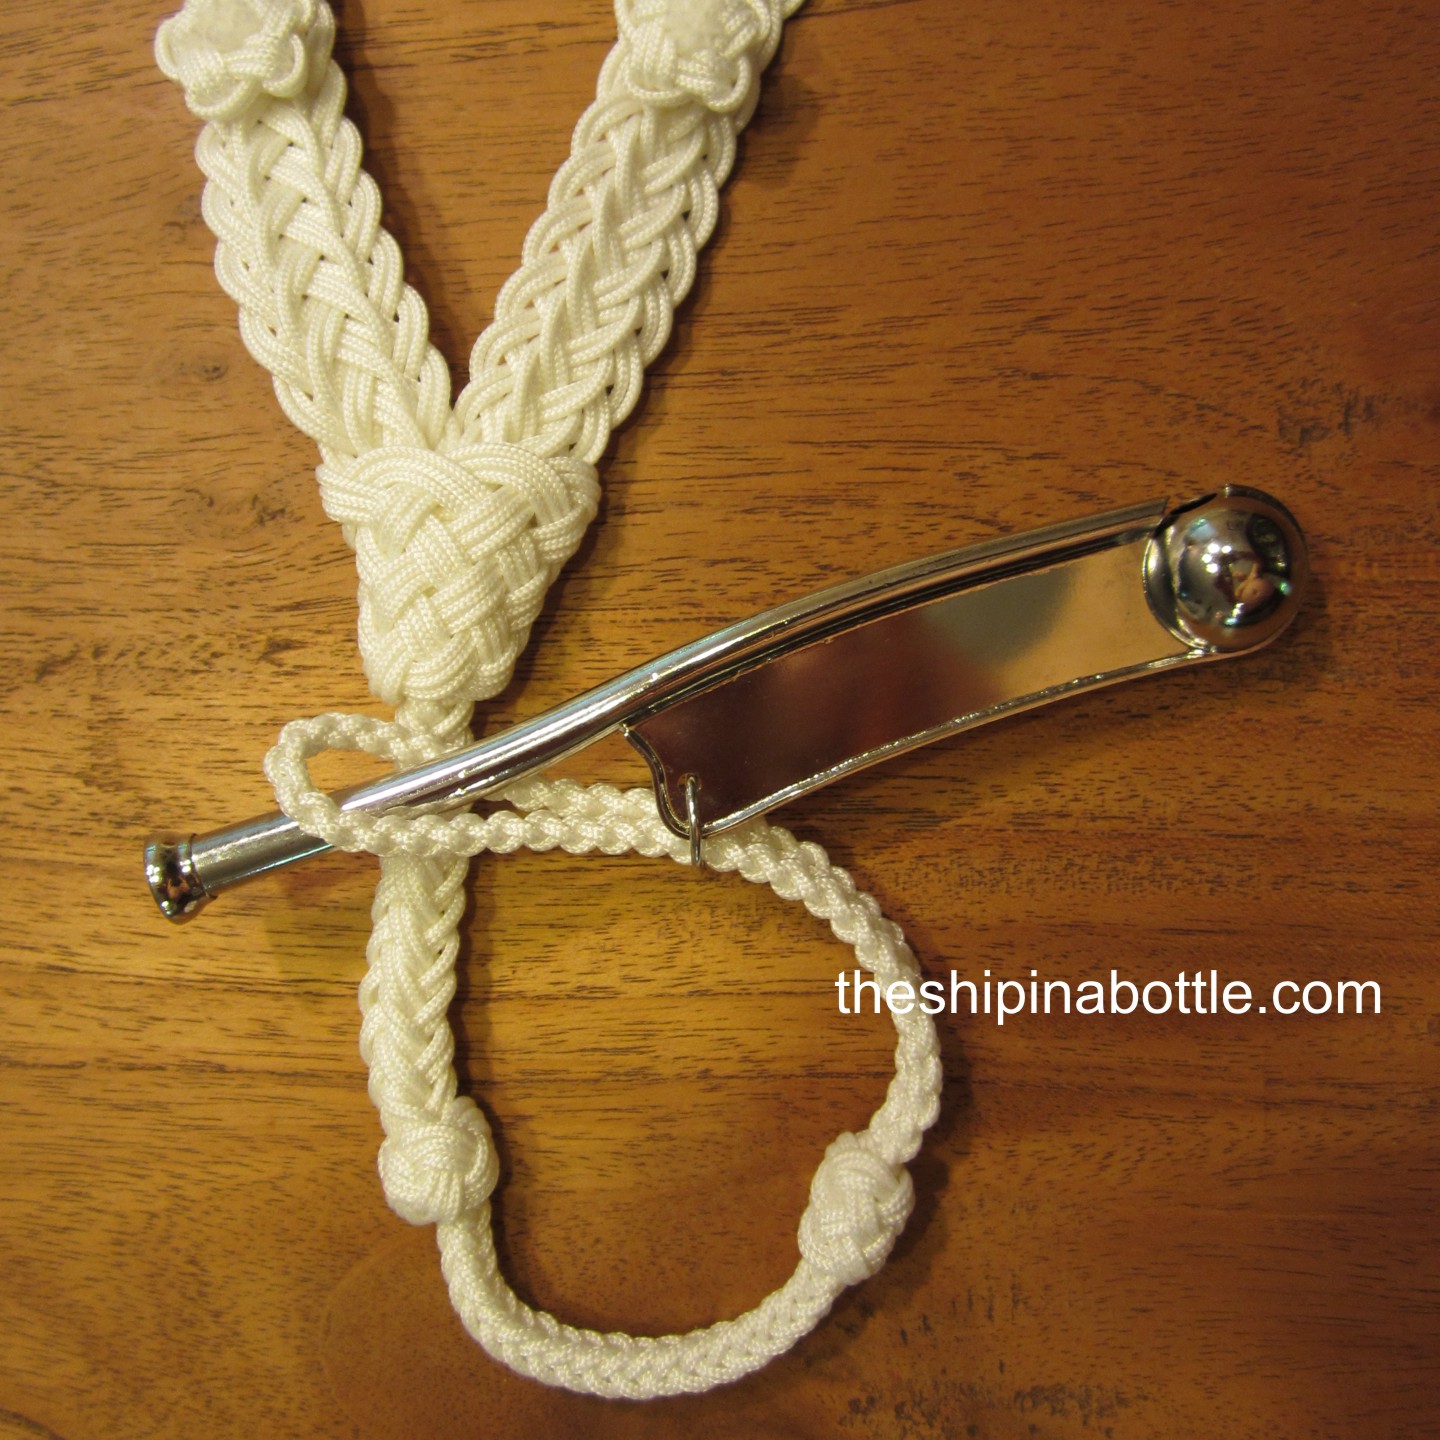 Pair of Small Rope Ball Nautical Decorations - Beautiful Rope Decor